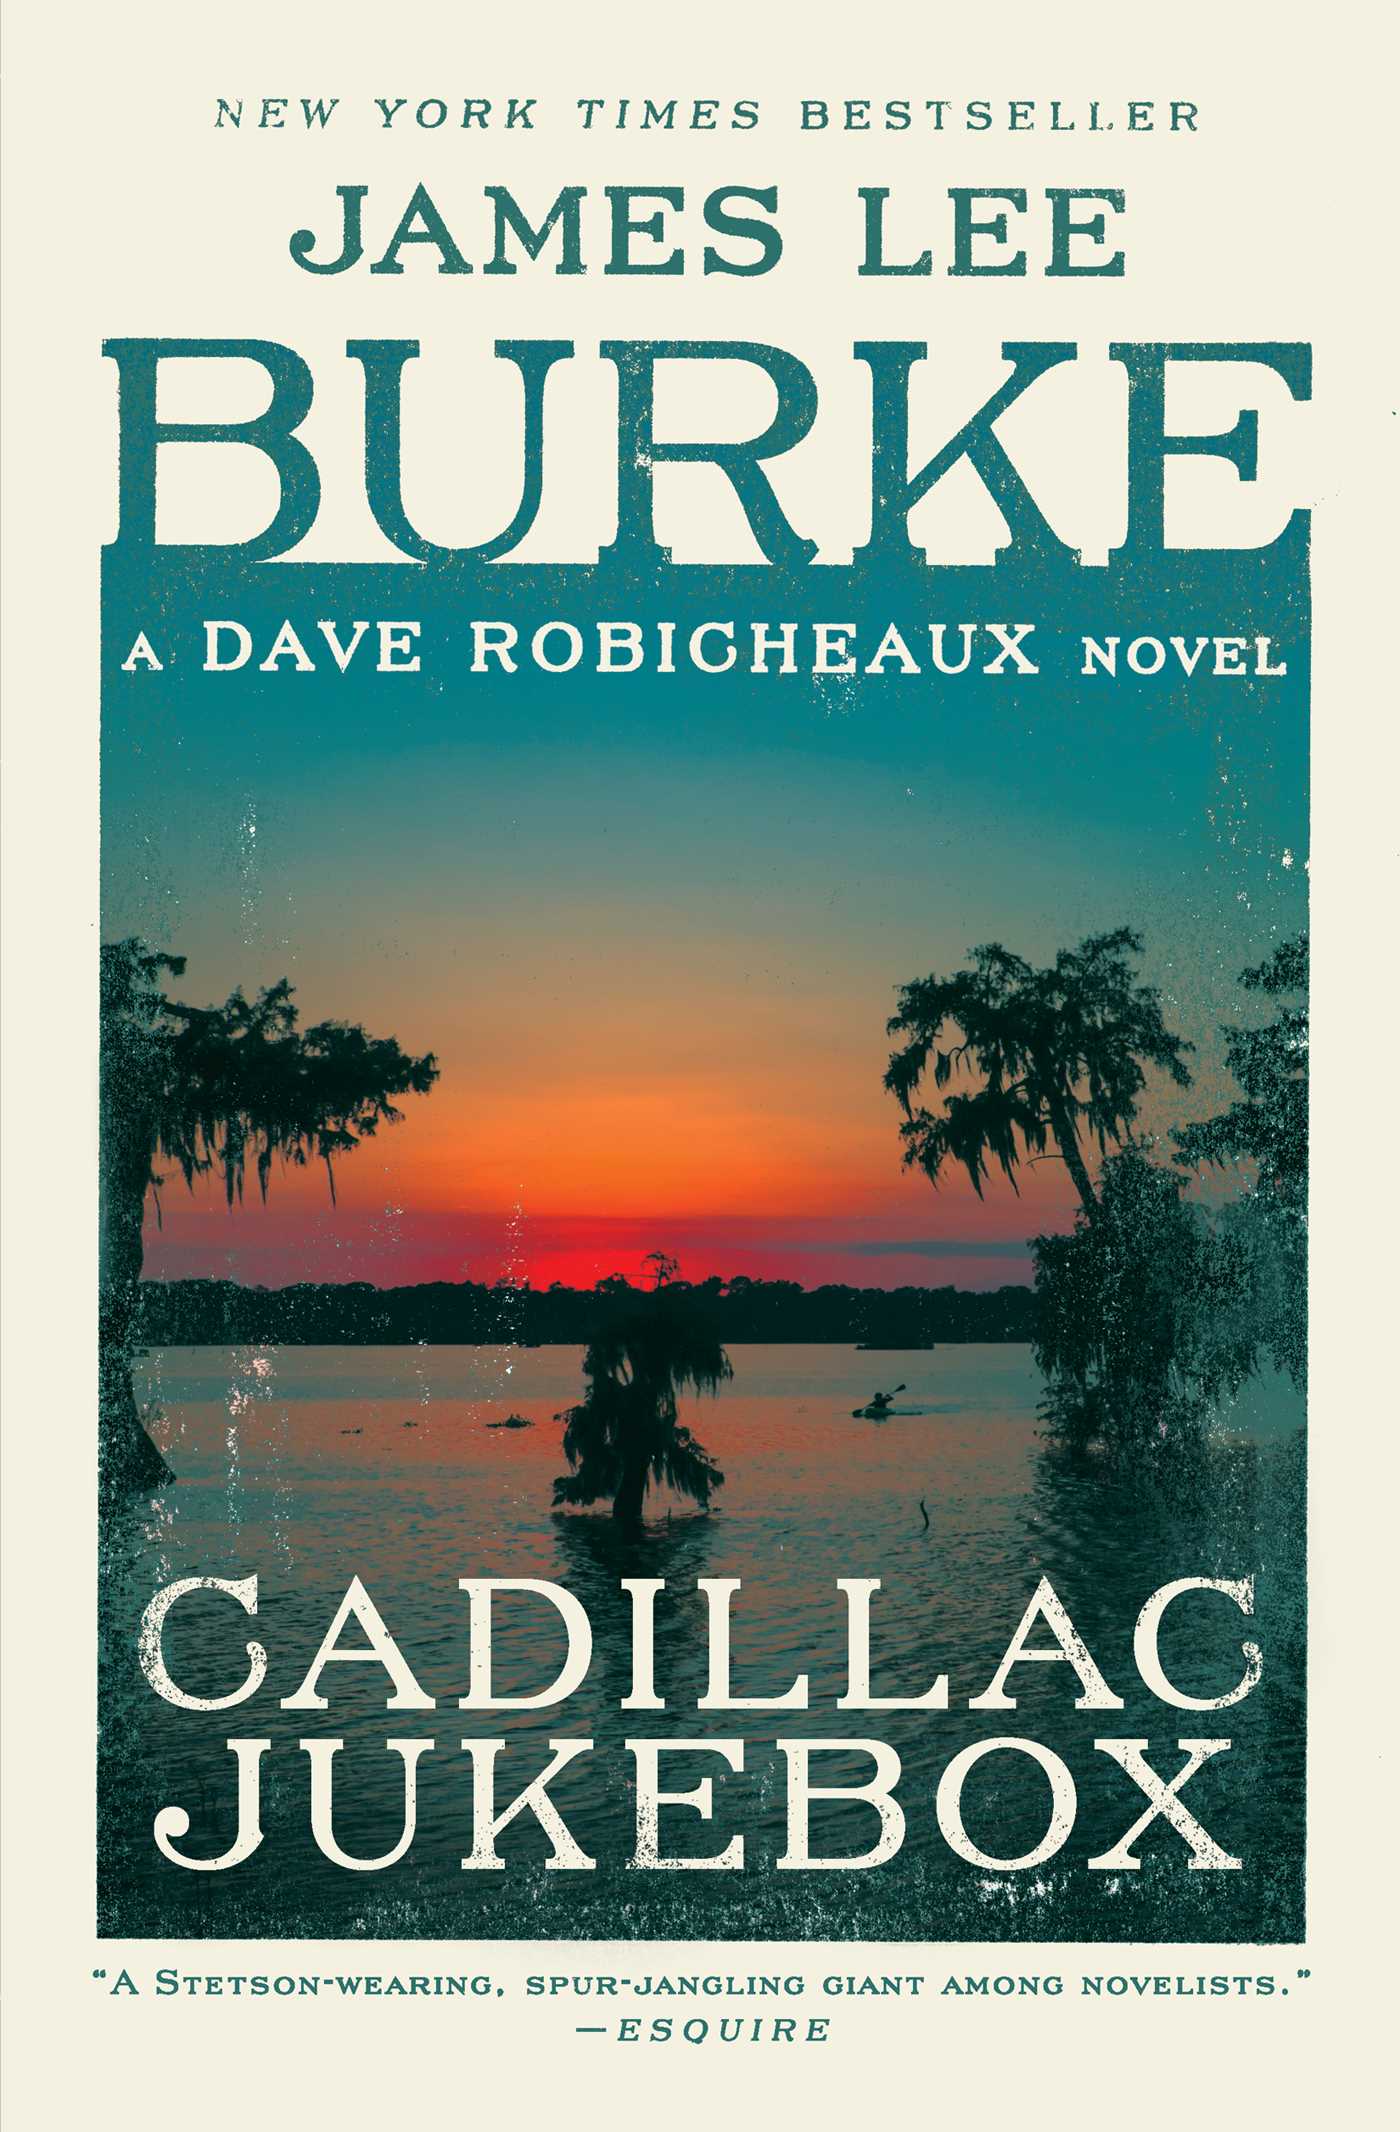 Dave Robicheaux: Cadillac Jukebox (Paperback) - image 1 of 1